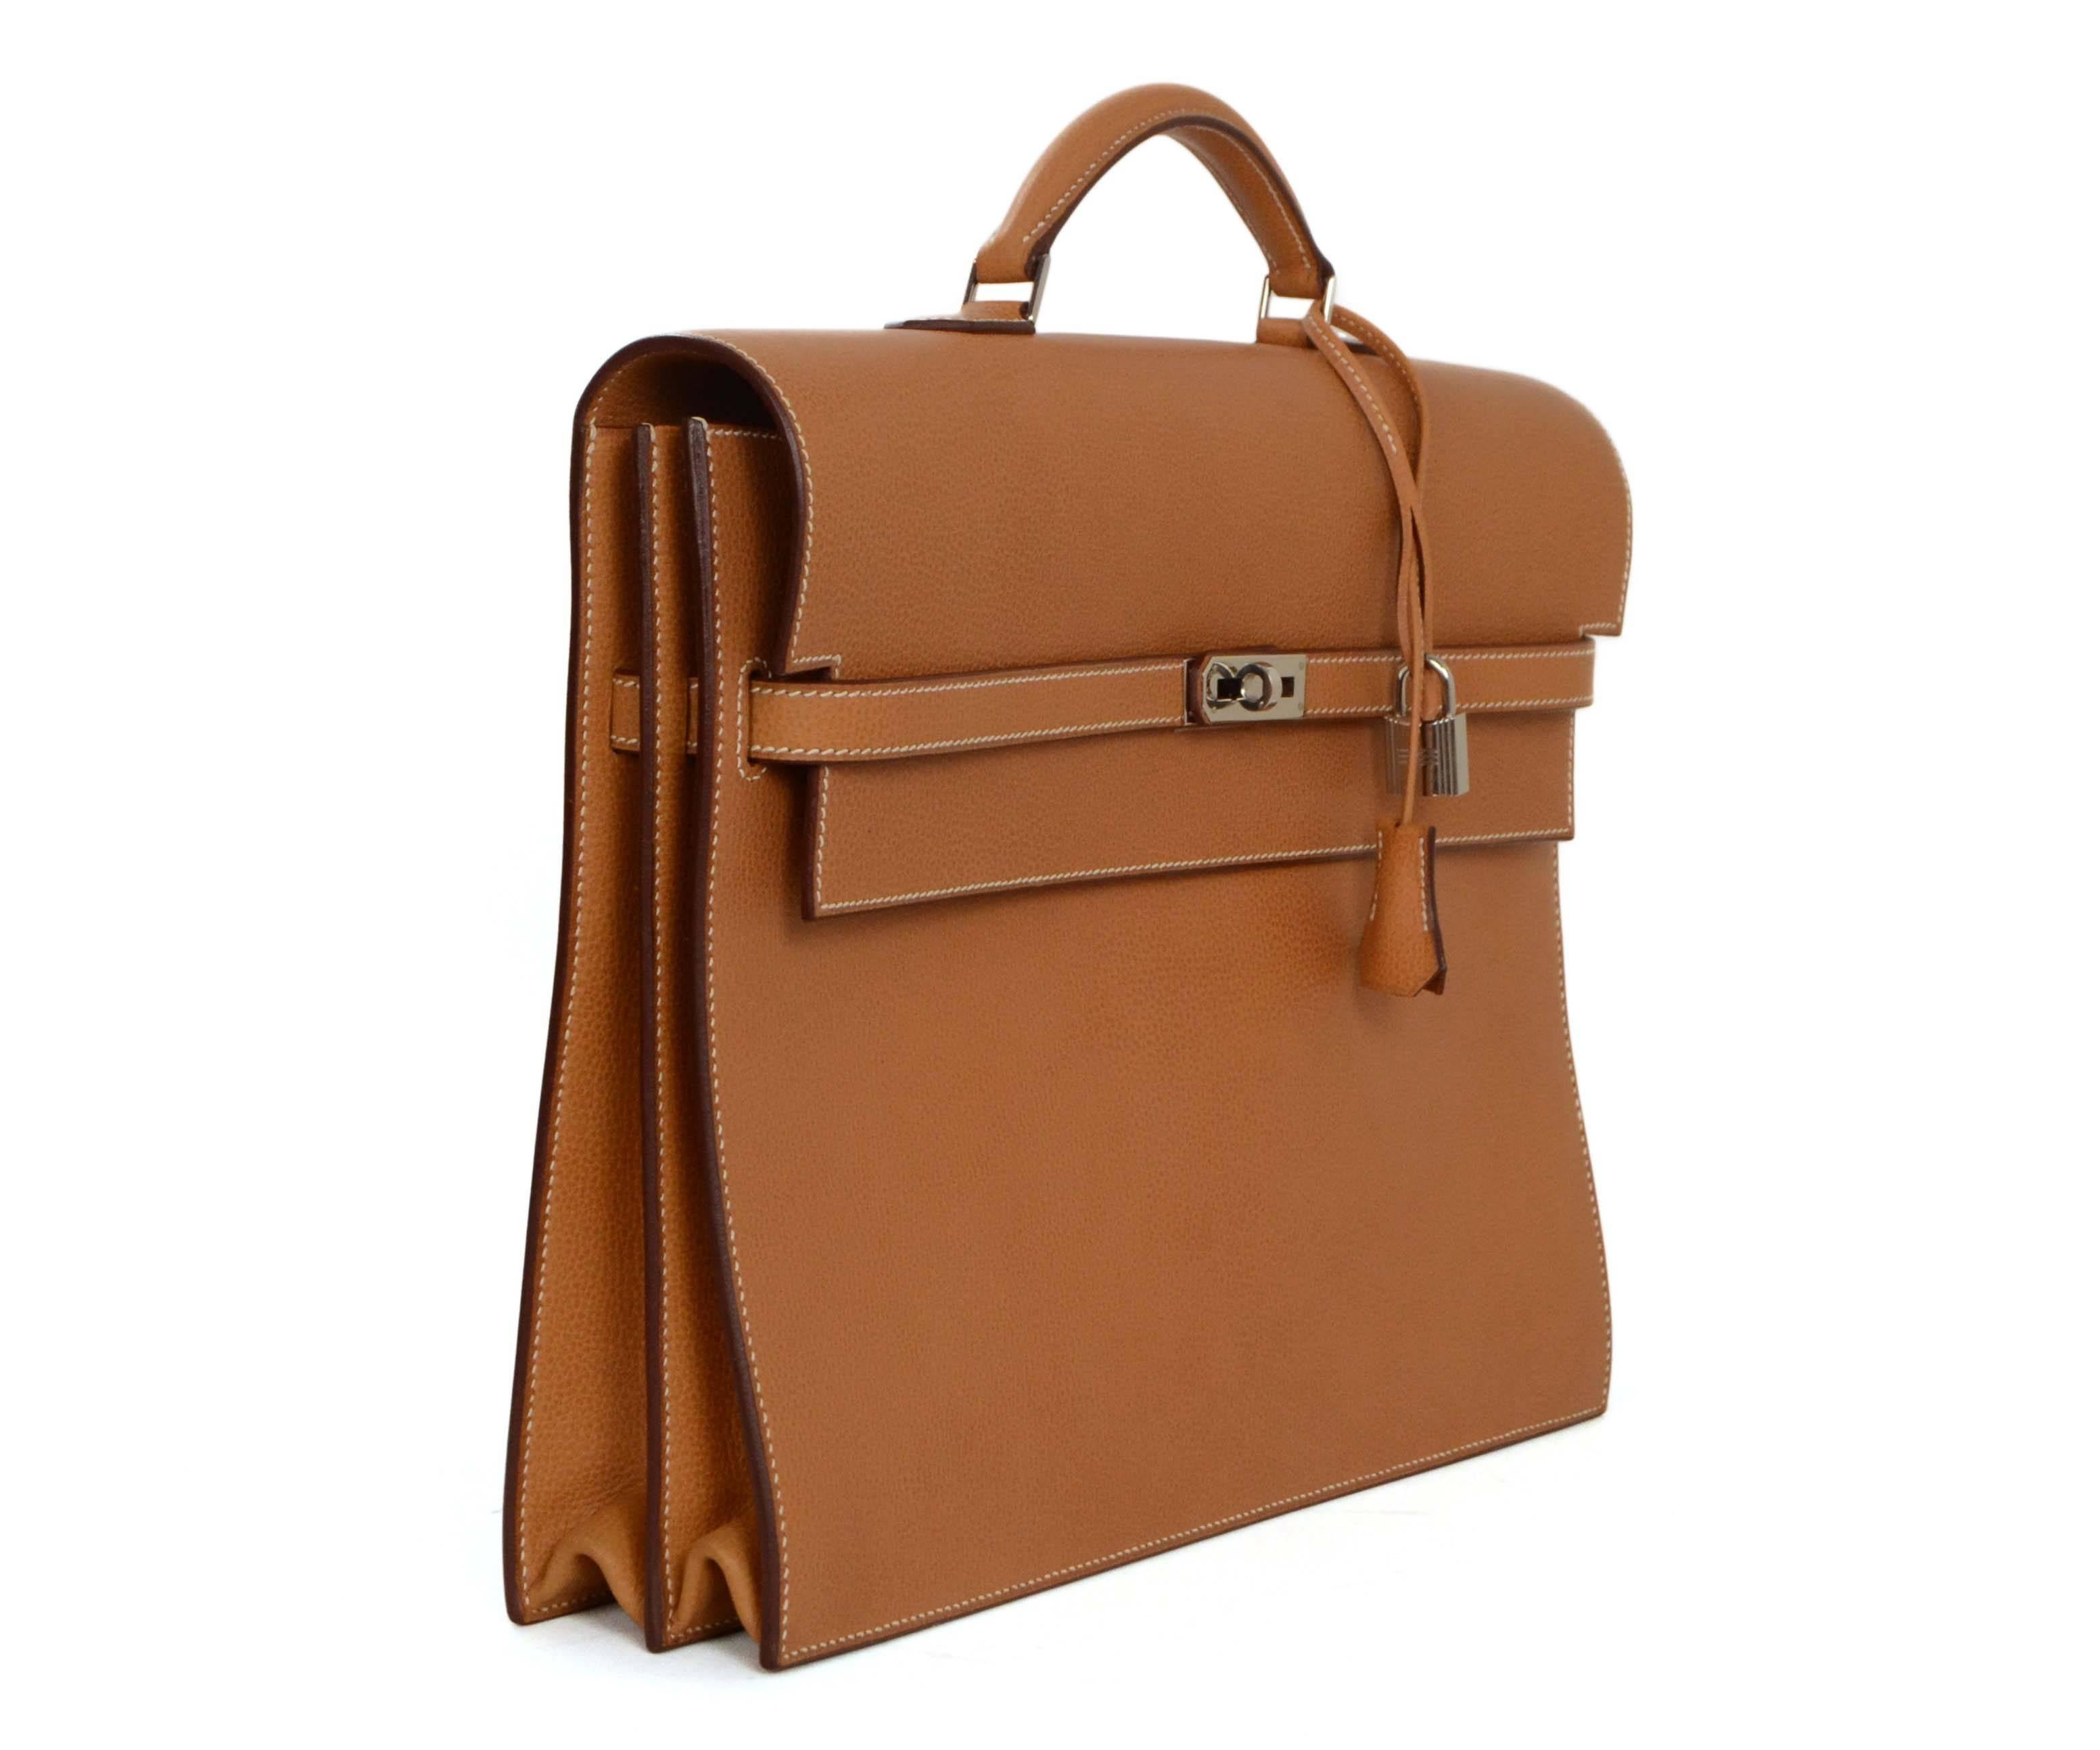 Hermes Gold Vache Liegee 38cm Kelly Depeche Briefcase 
Features white contrast stitching
Made In: France
Year of Production: 2004
Color: Gold (tan)
Hardware: Palladium
Materials: Vache liegee leather
Lining: Gold (tan) leather and